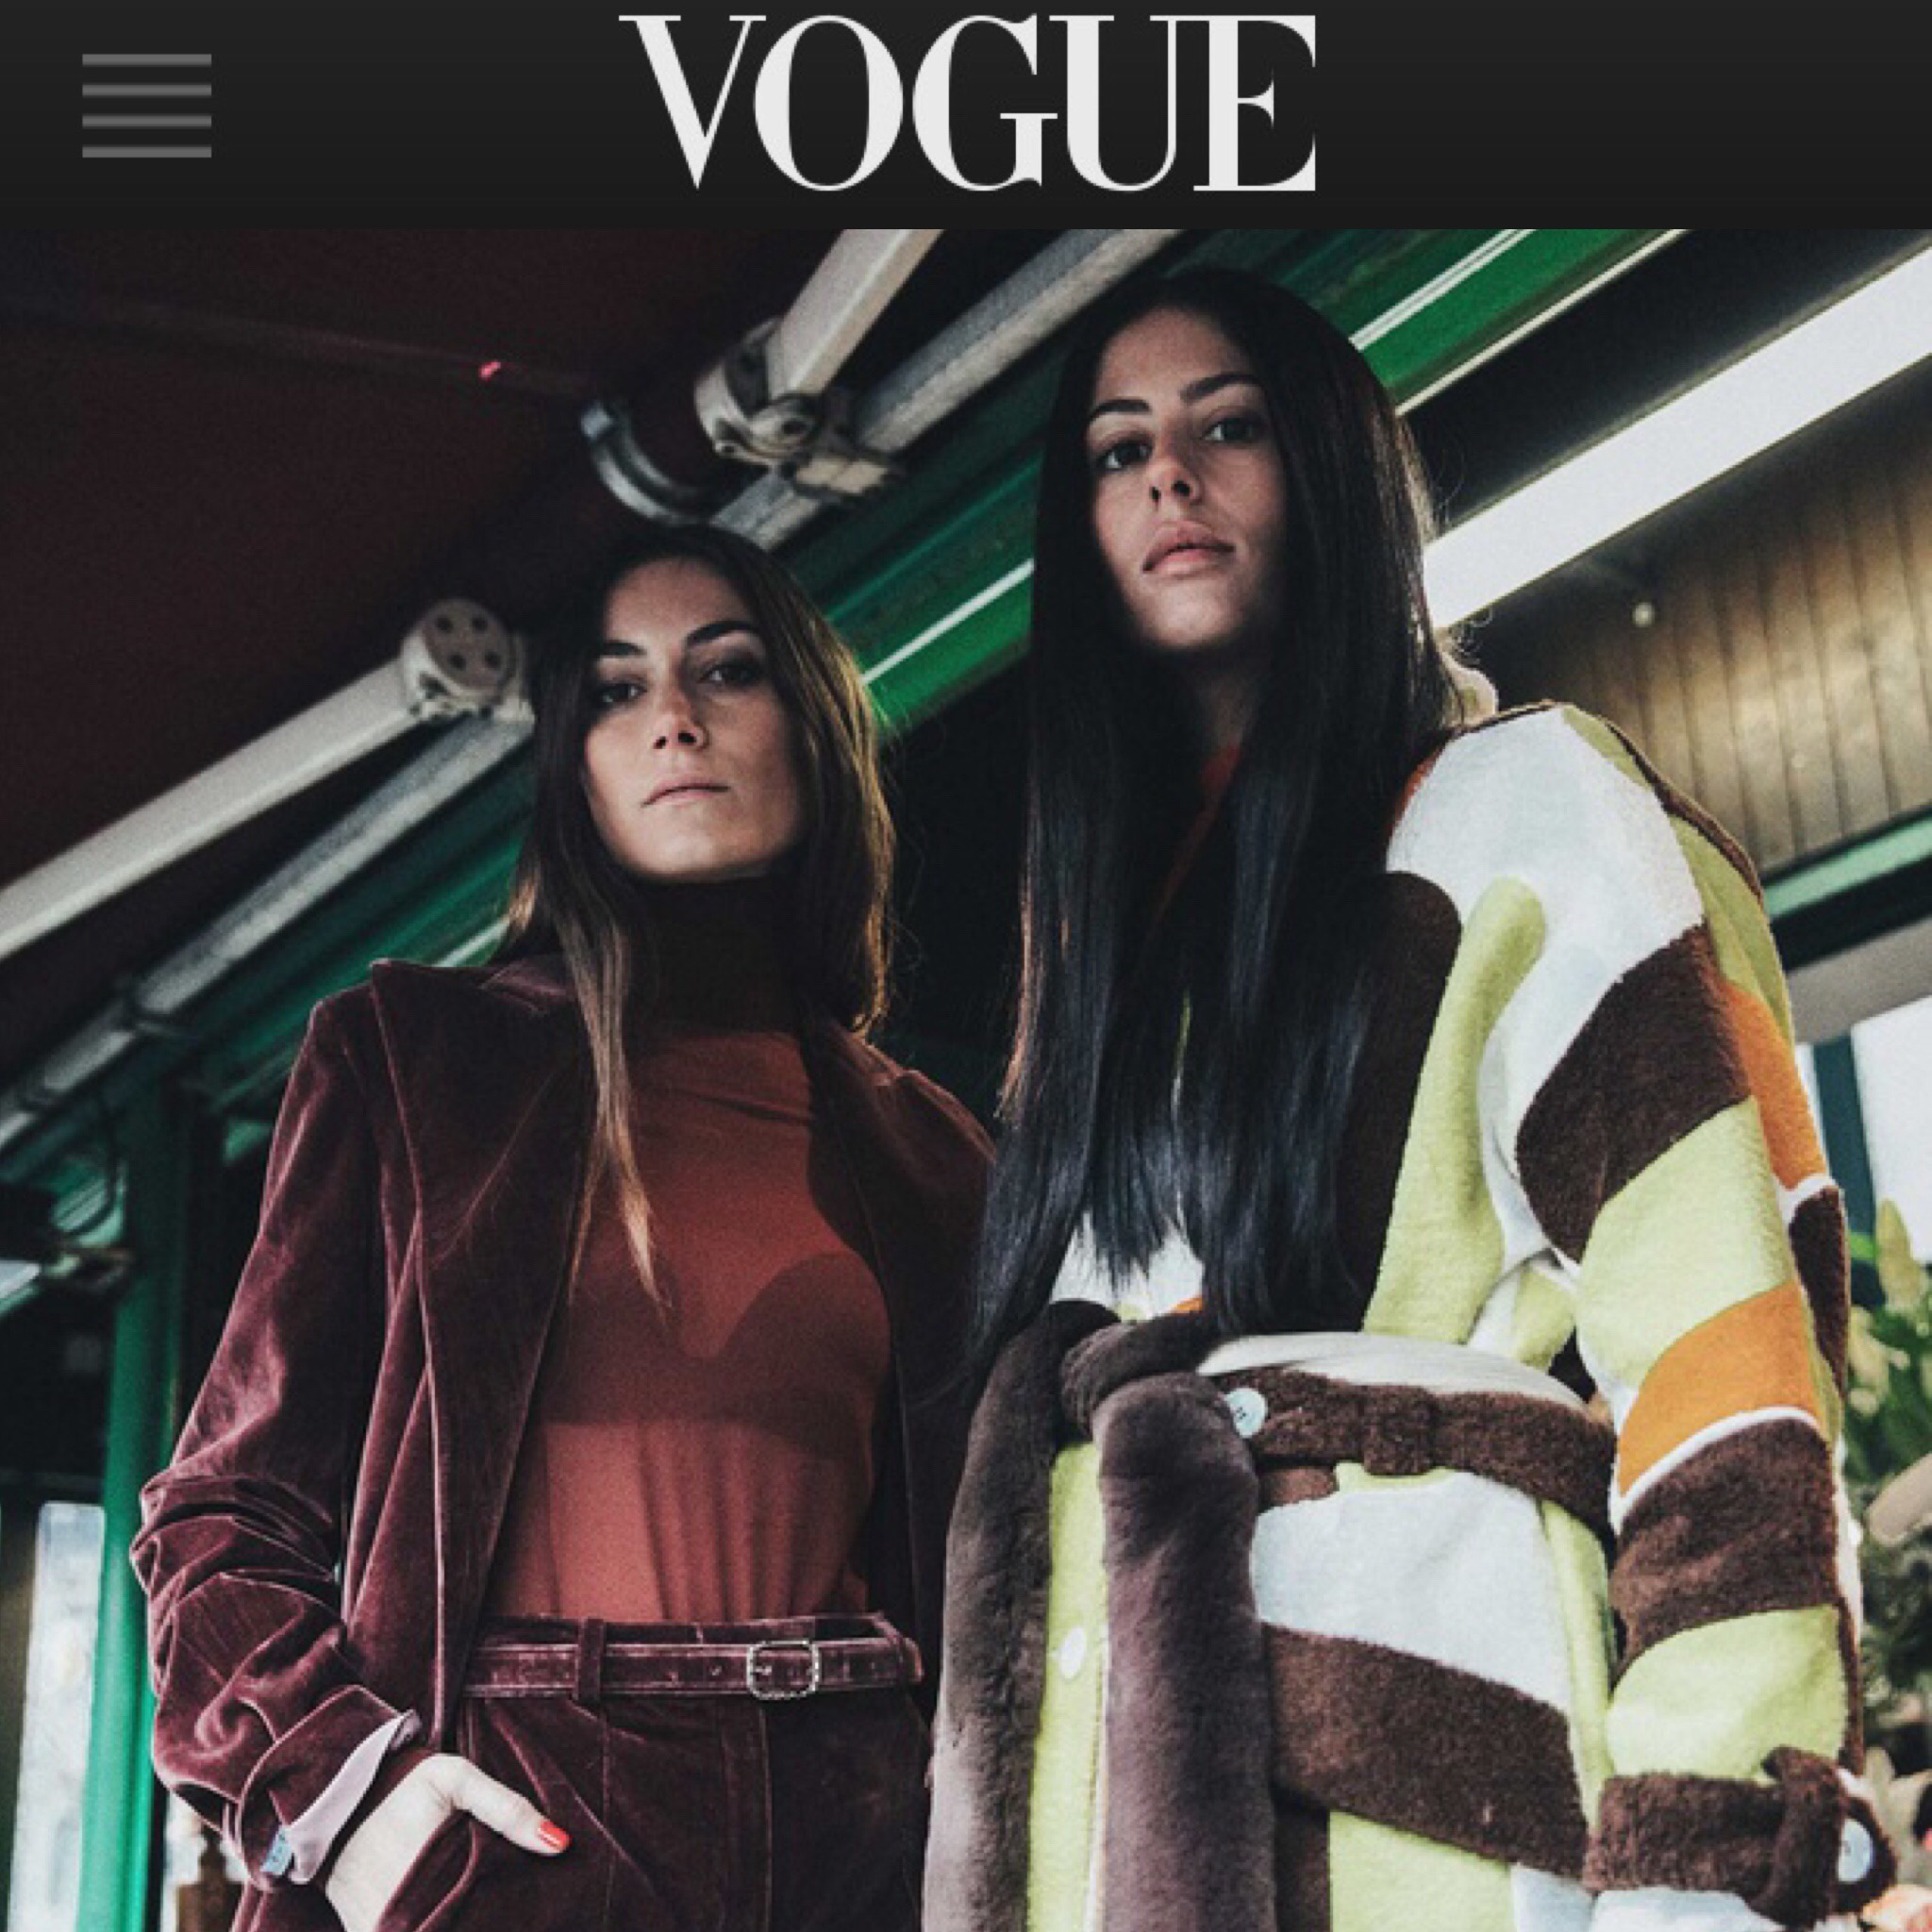 Vogue 7-Day Feature